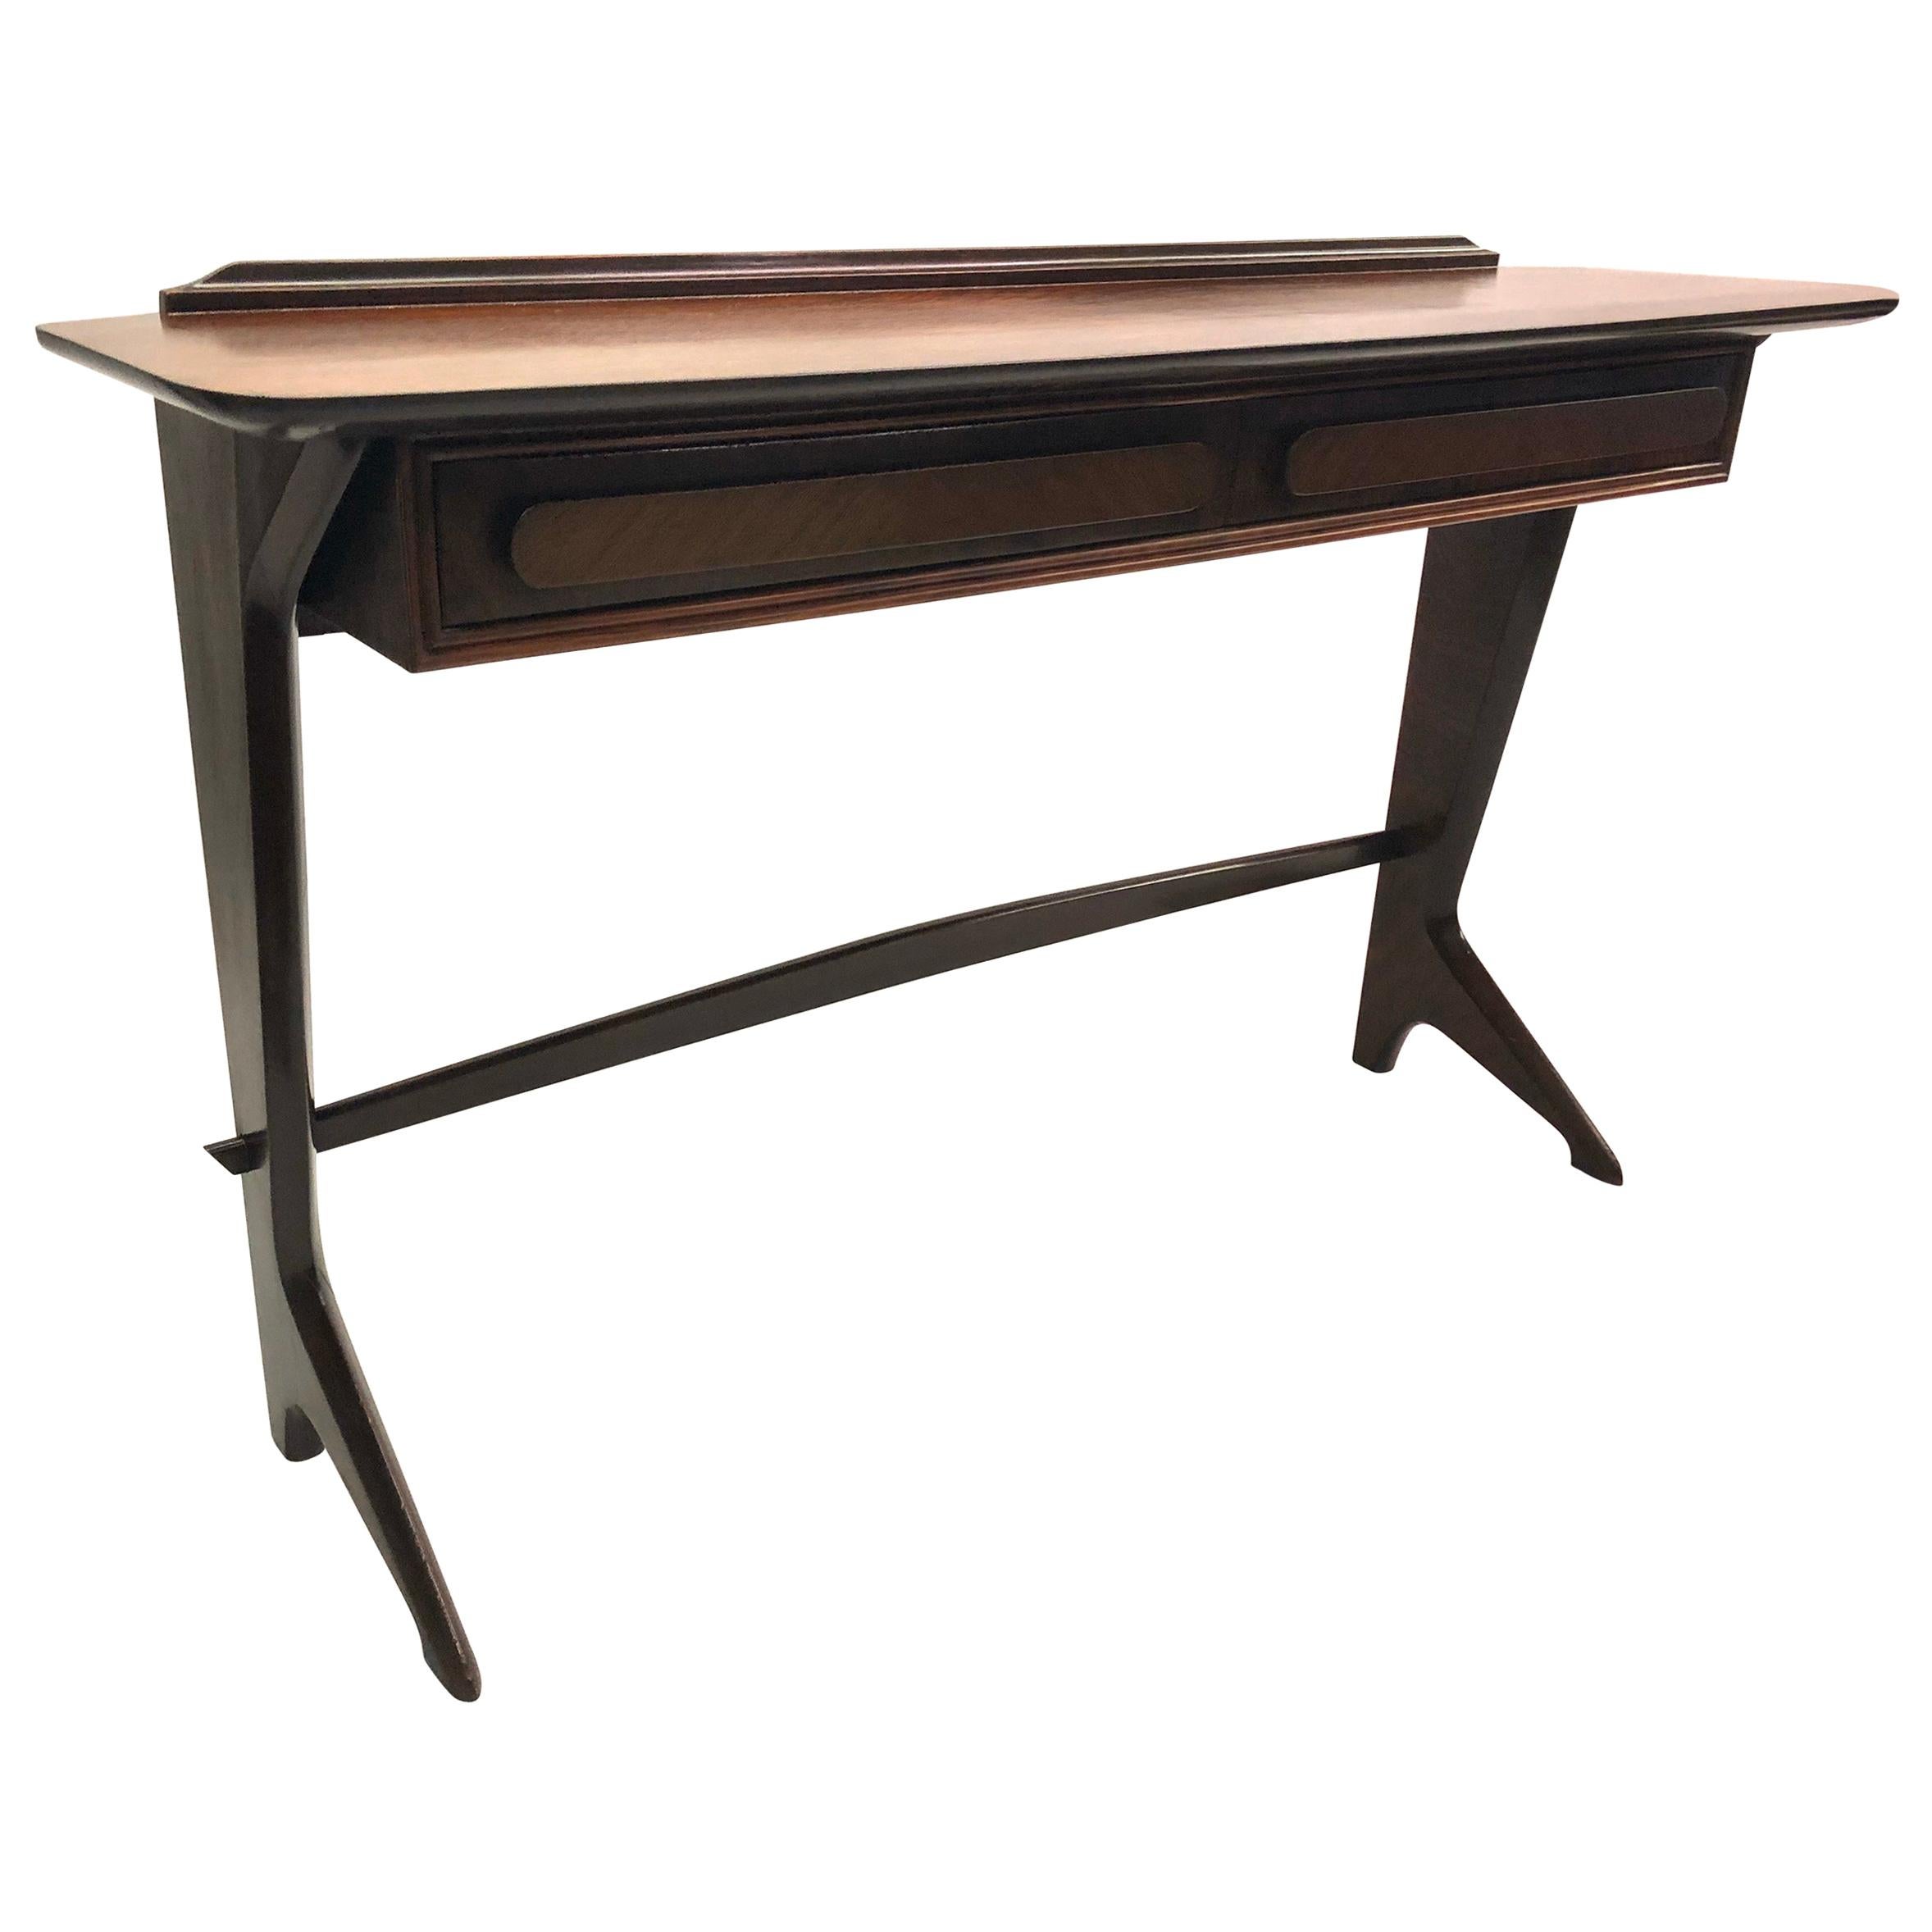 Rare and Important Italian Mid-Century Modern Rosewood Console by Ico Parisi